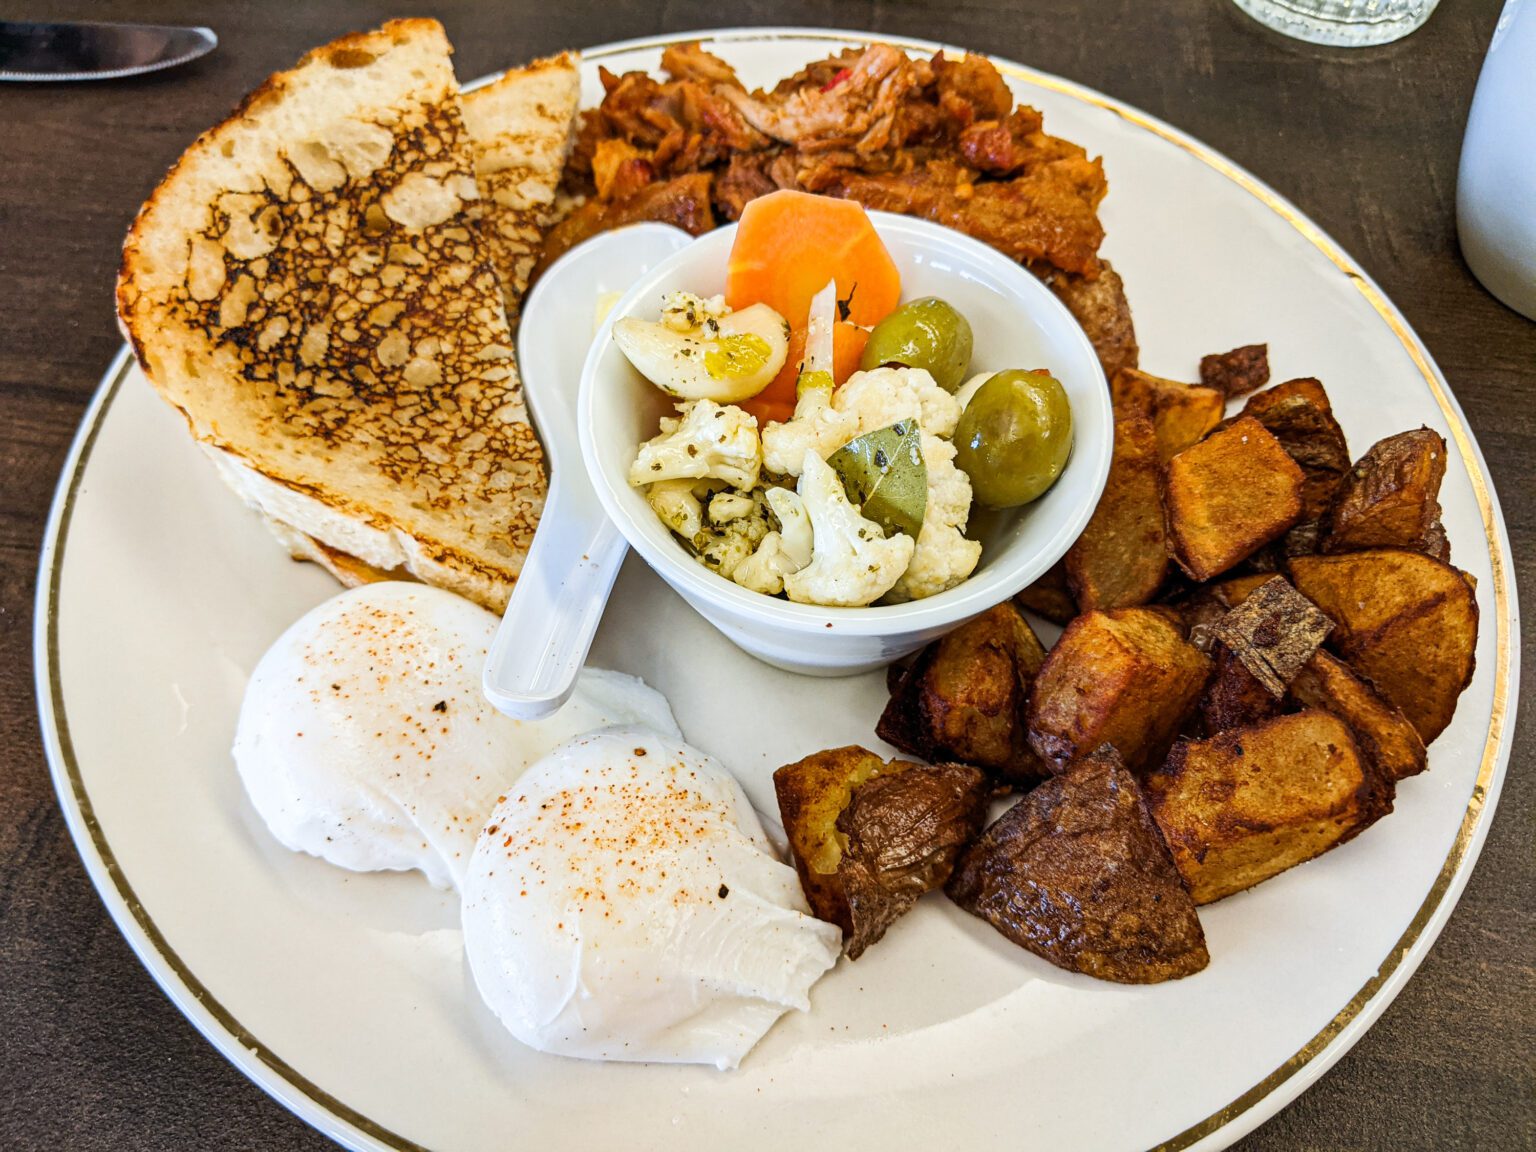 The “Brookefeast” plate at Martini Brunch — a new enterprise from Charlie and Brooke Martin in Mount Vernon — is an almost-classic-diner breakfast of eggs